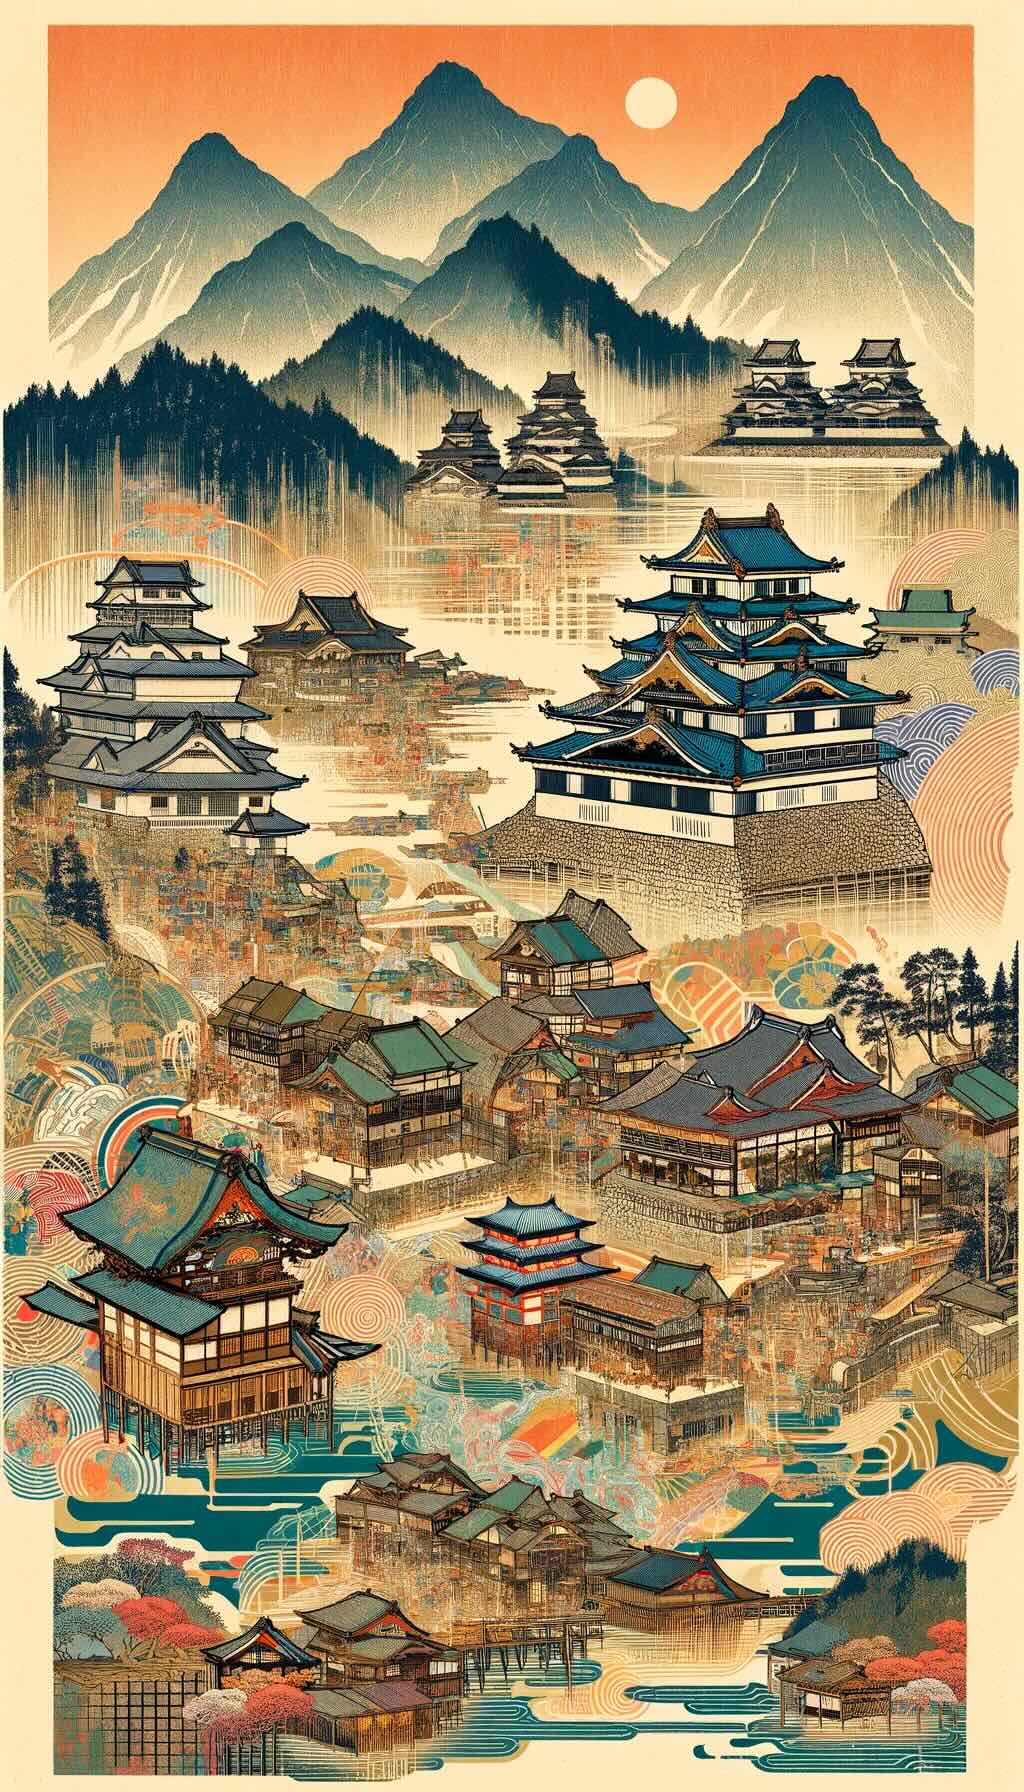 Cultural and historical essence of the Japanese countryside depicts serene temples, rural castles, and vibrant local traditions and festivals.